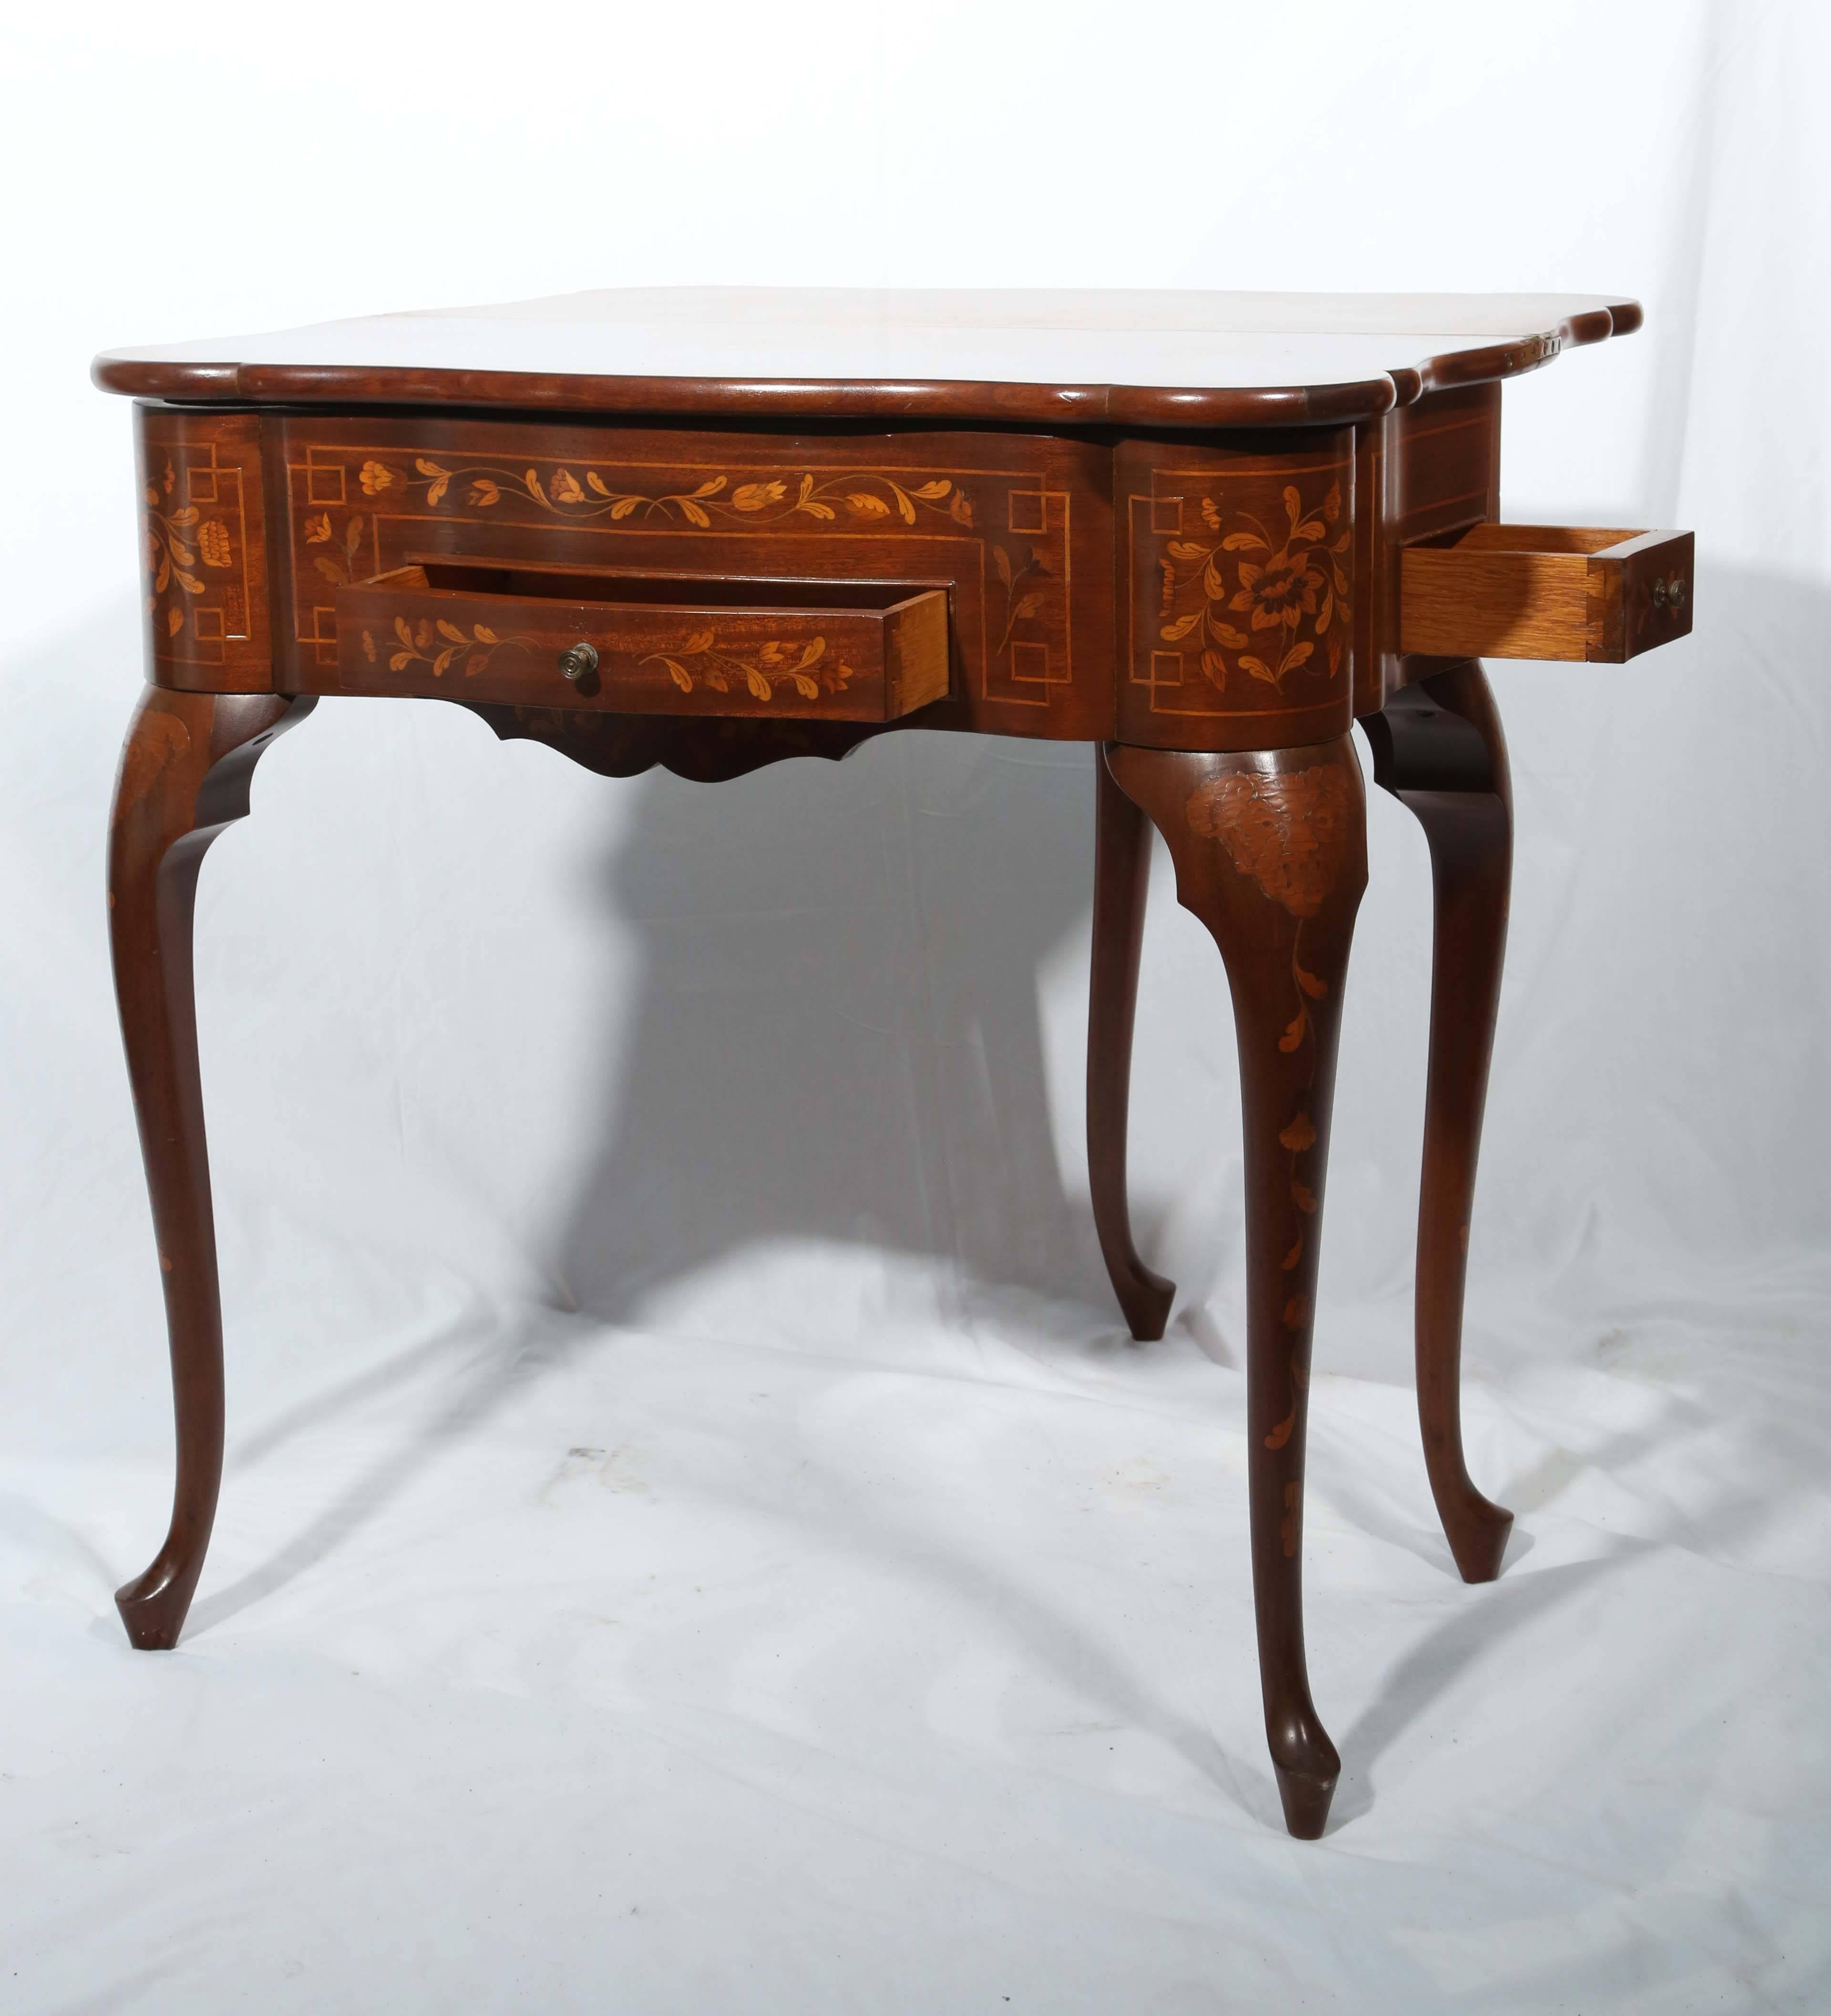 Inlay Fine Dutch Marquetry Game Table